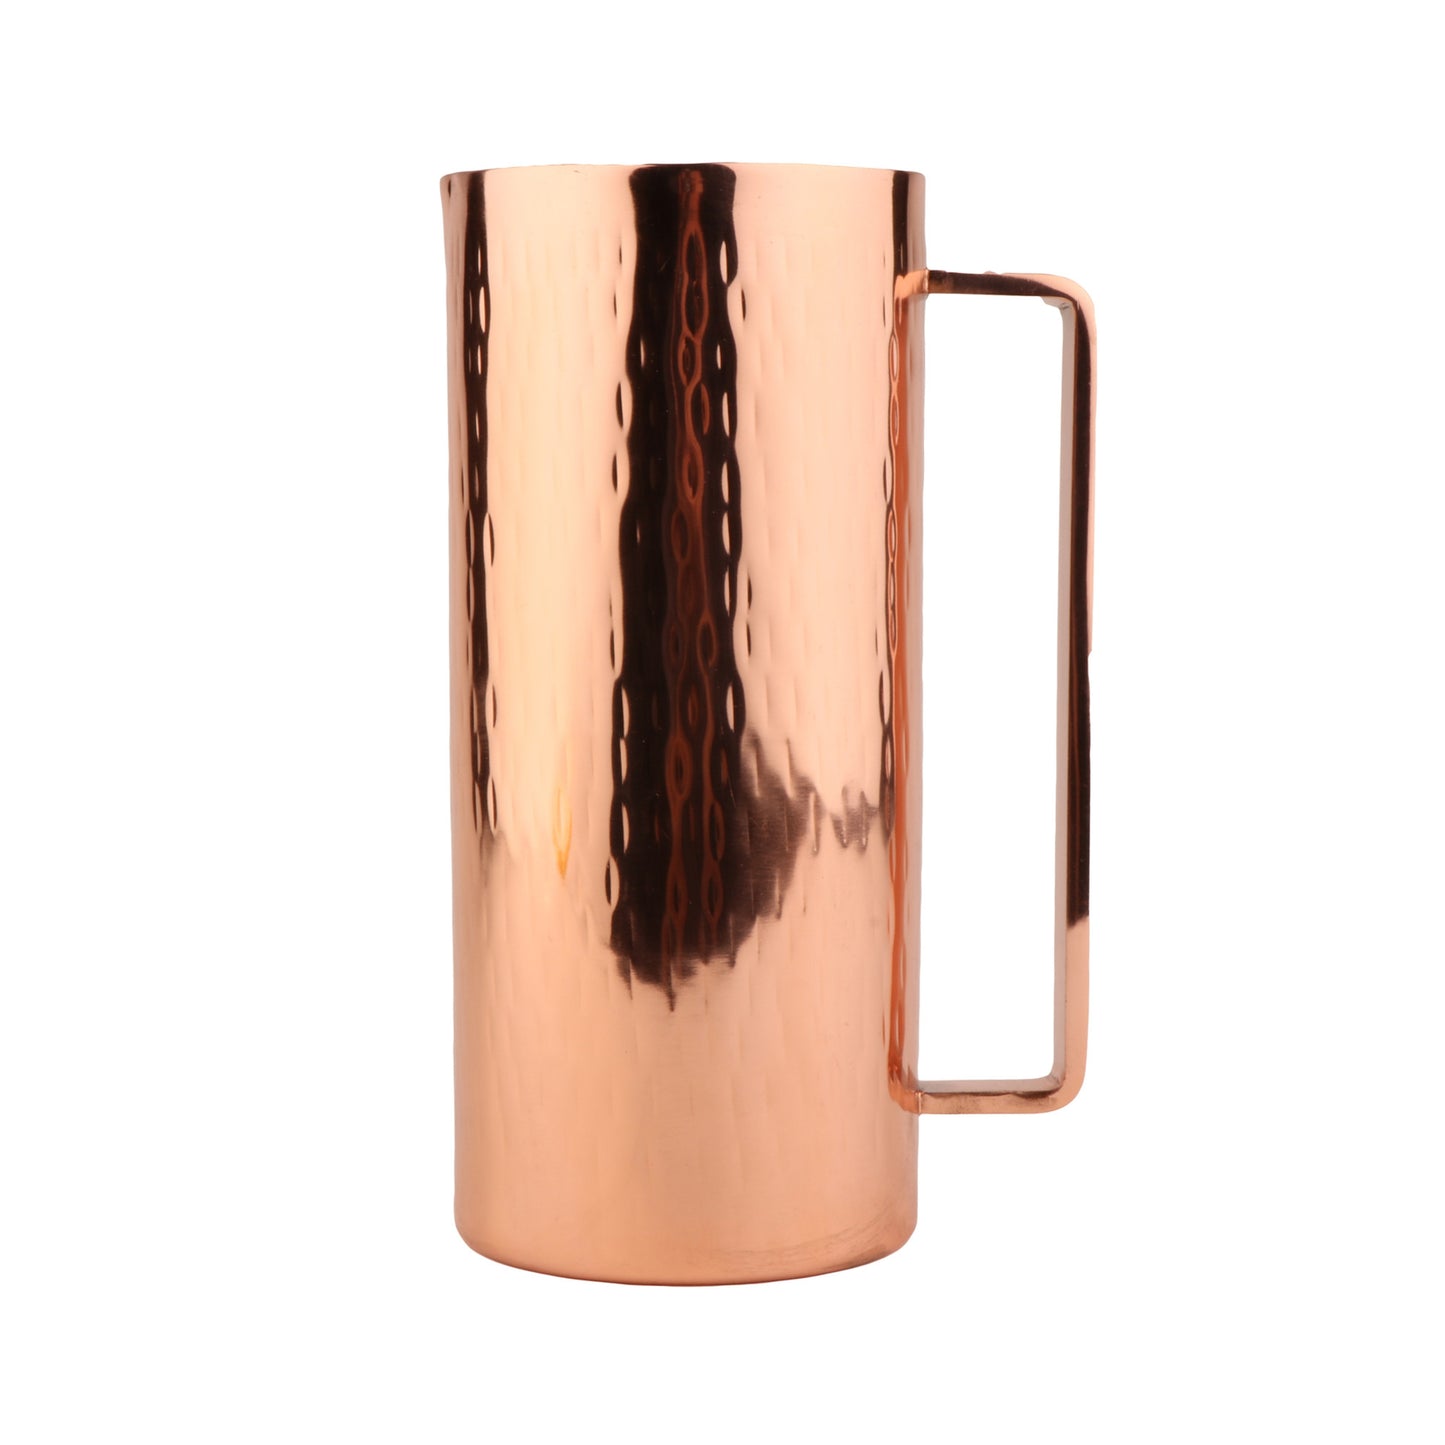 1.6 qt. Copper, Hammered Finish, Double Wall Pitcher with Handle, (2.1 qt. rim-full), 4.8" Top Dia., 10" Tall, G.E.T. Copper Drinkware